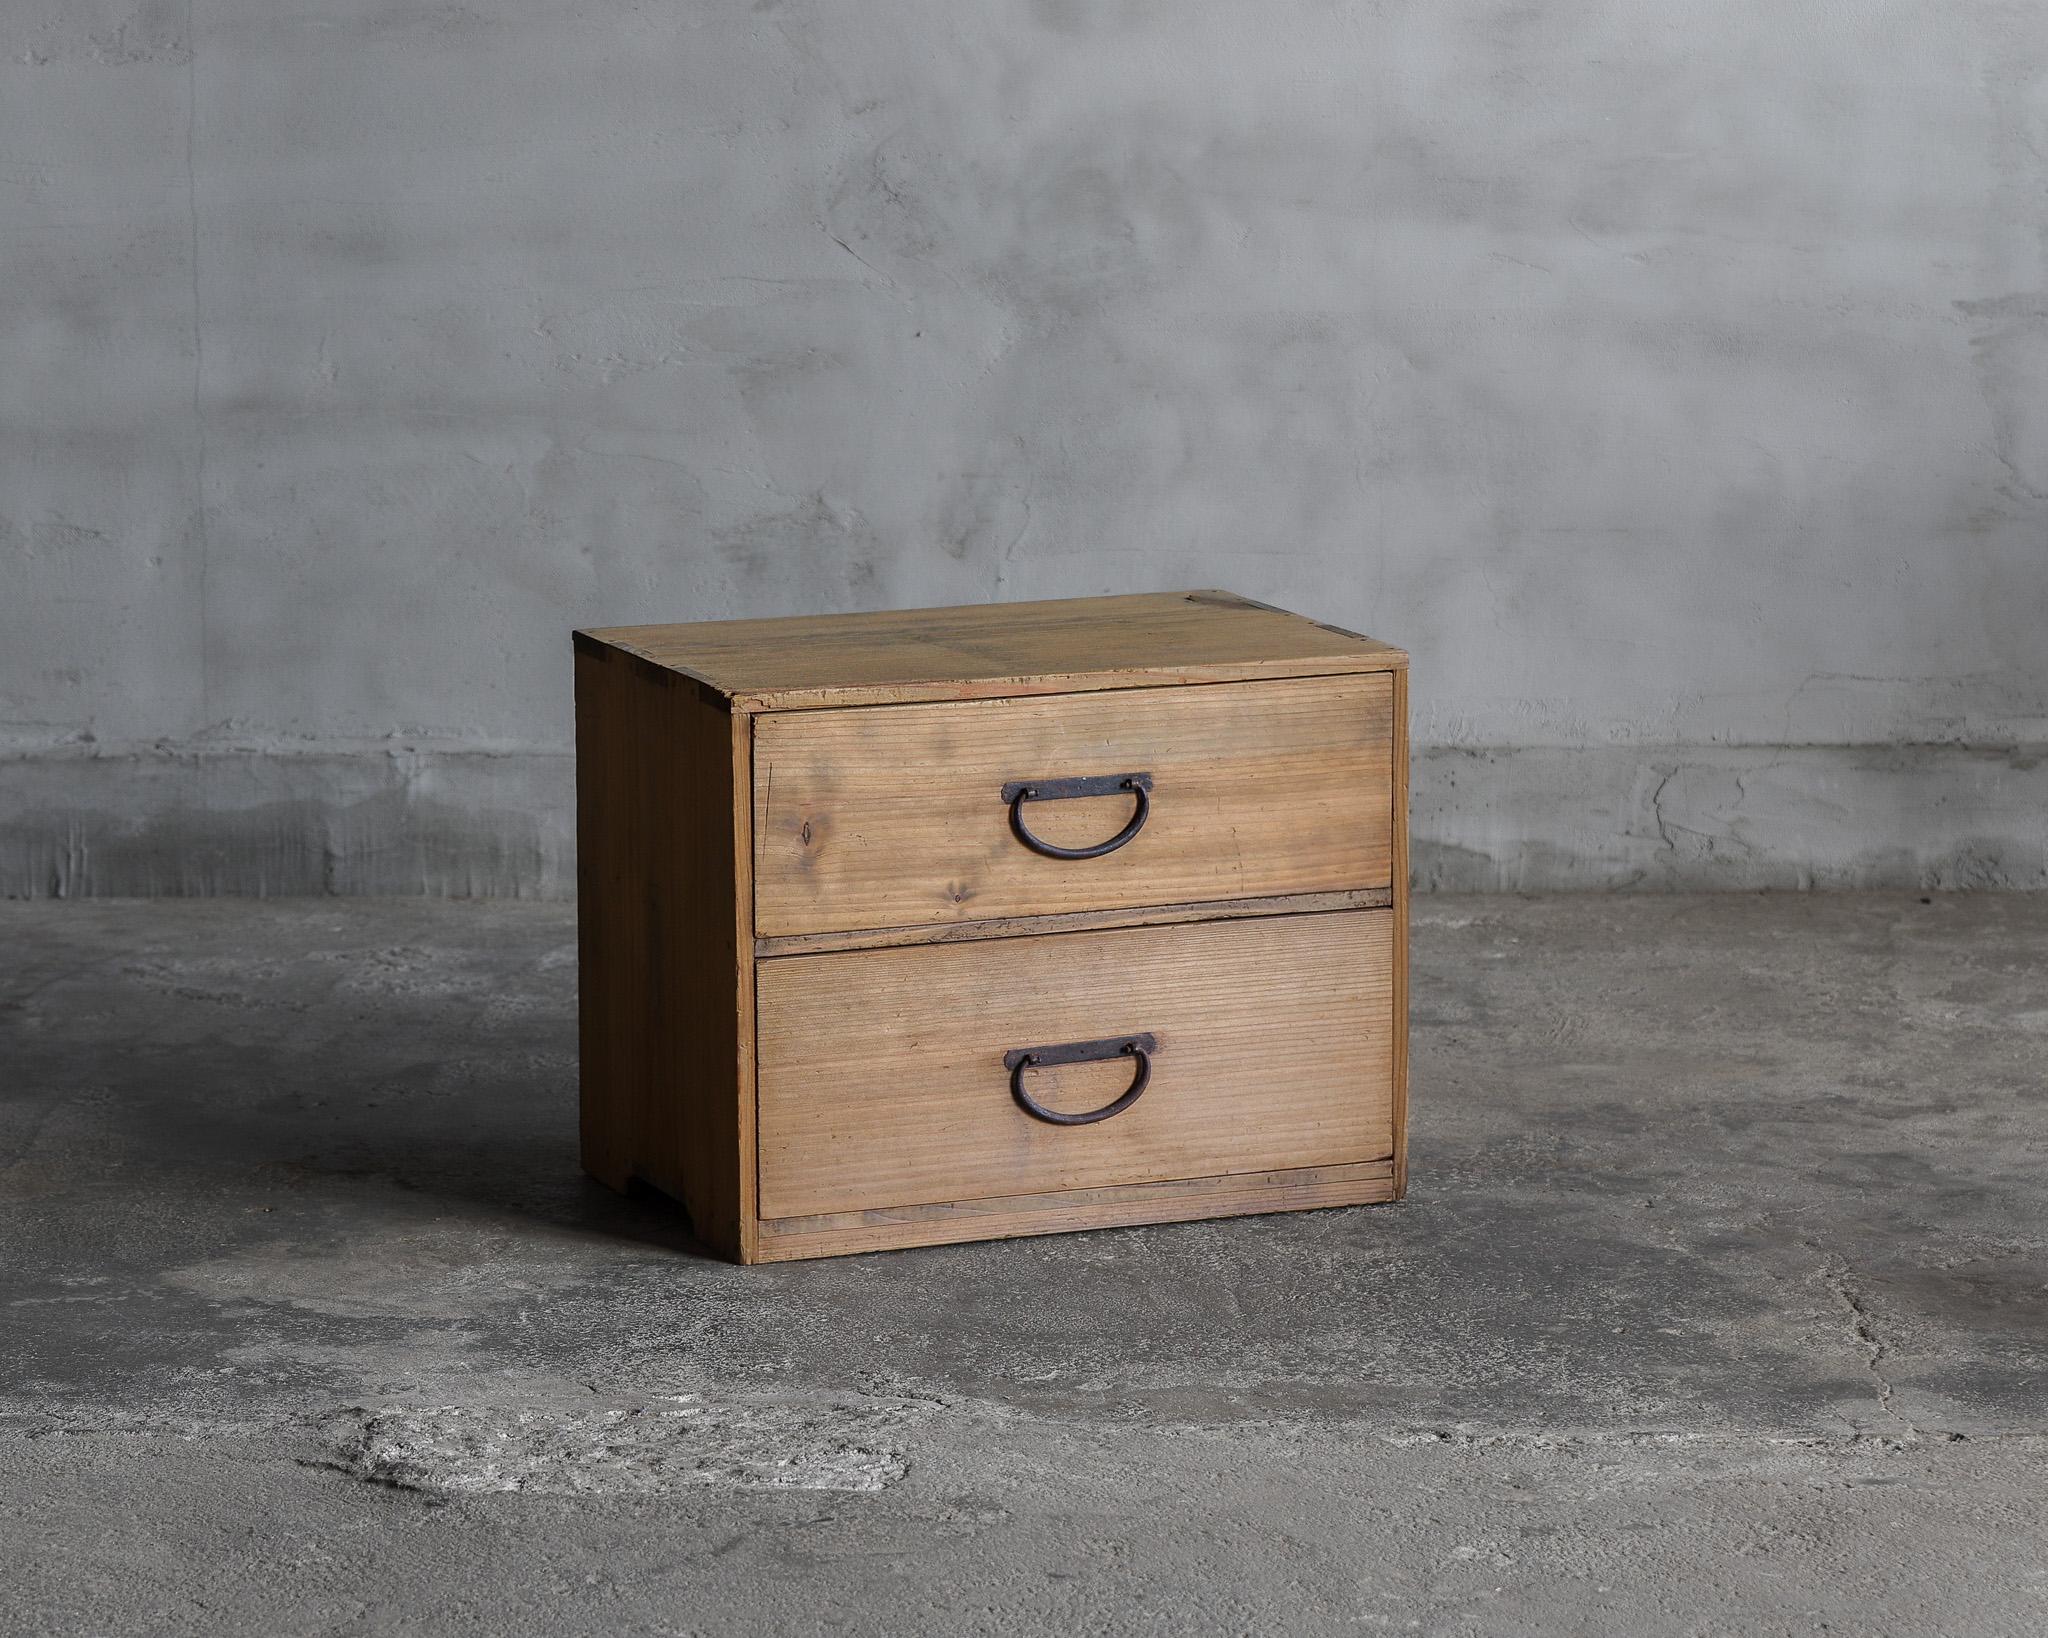 This two-drawer piece was made in the Taisho period. It is made of cedar wood with a rich, textured grain.

It is ideal for organizing and keeping small items and documents in order. The top and bottom drawers are designed for ease of use, and